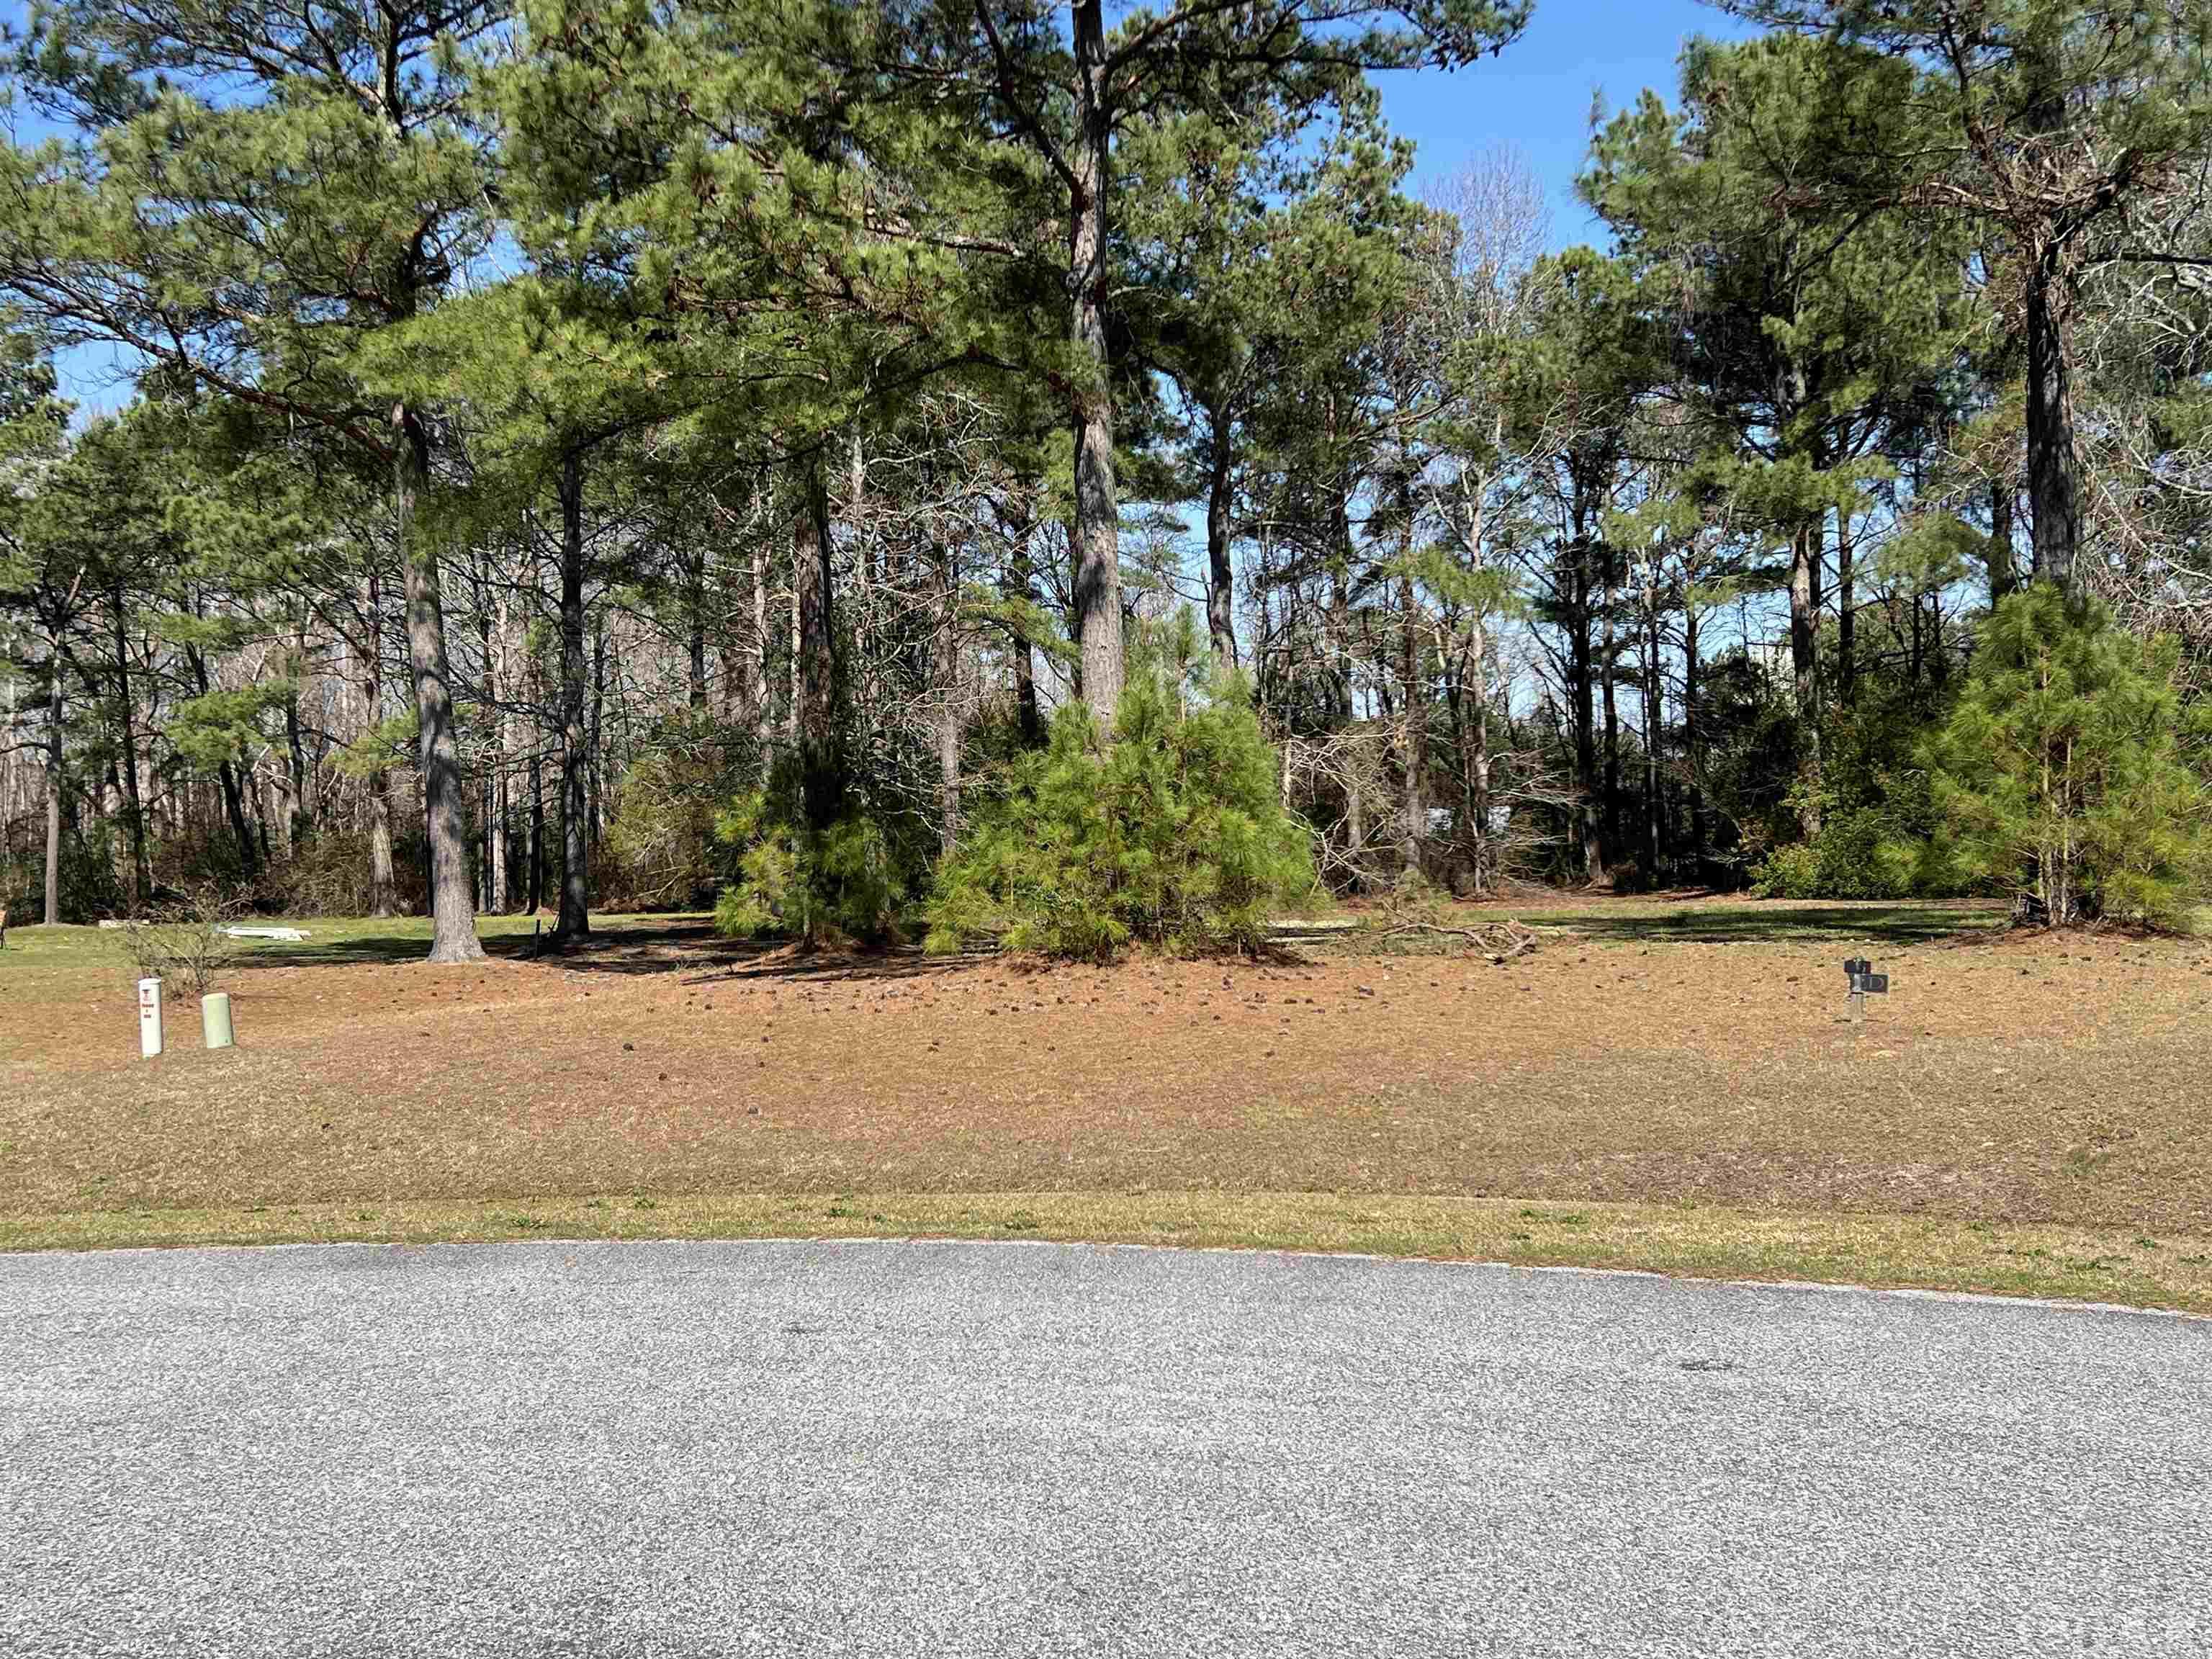 Looking for a quiet tranquil location to build that dream home! This spot could be it! Partially wooded, nearly 3/4 of an acre lot is located on a quiet dead-end road. View the Currituck Sound from street, with a very short walk to the water. Just a few miles north of Grandy, 25 minutes from the Outer Banks and close proximity to Virginia. Don't miss out on this one!